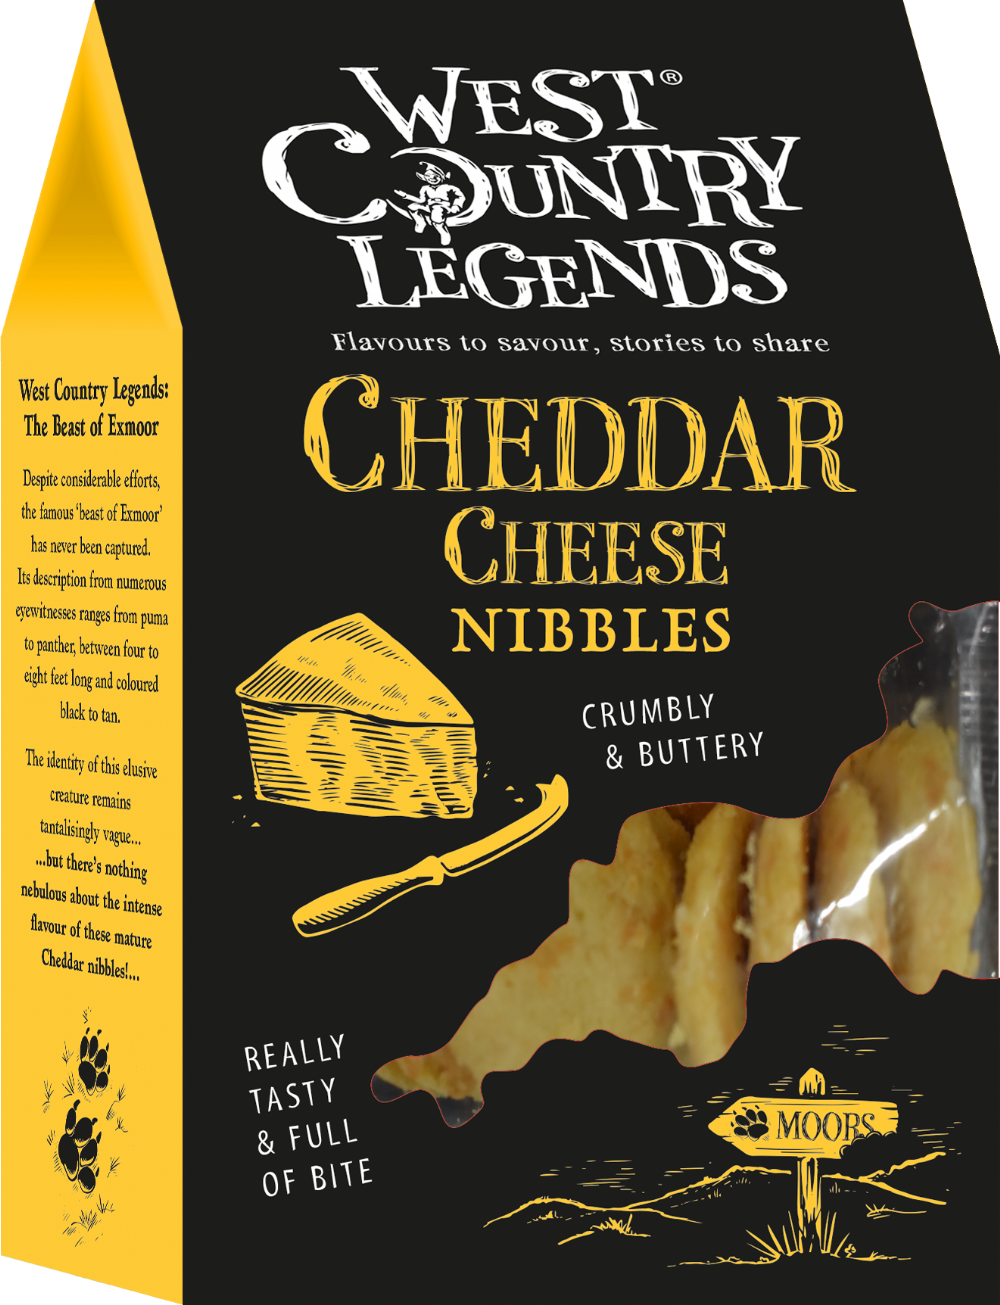 West Country Cheddar Cheese Nibbles